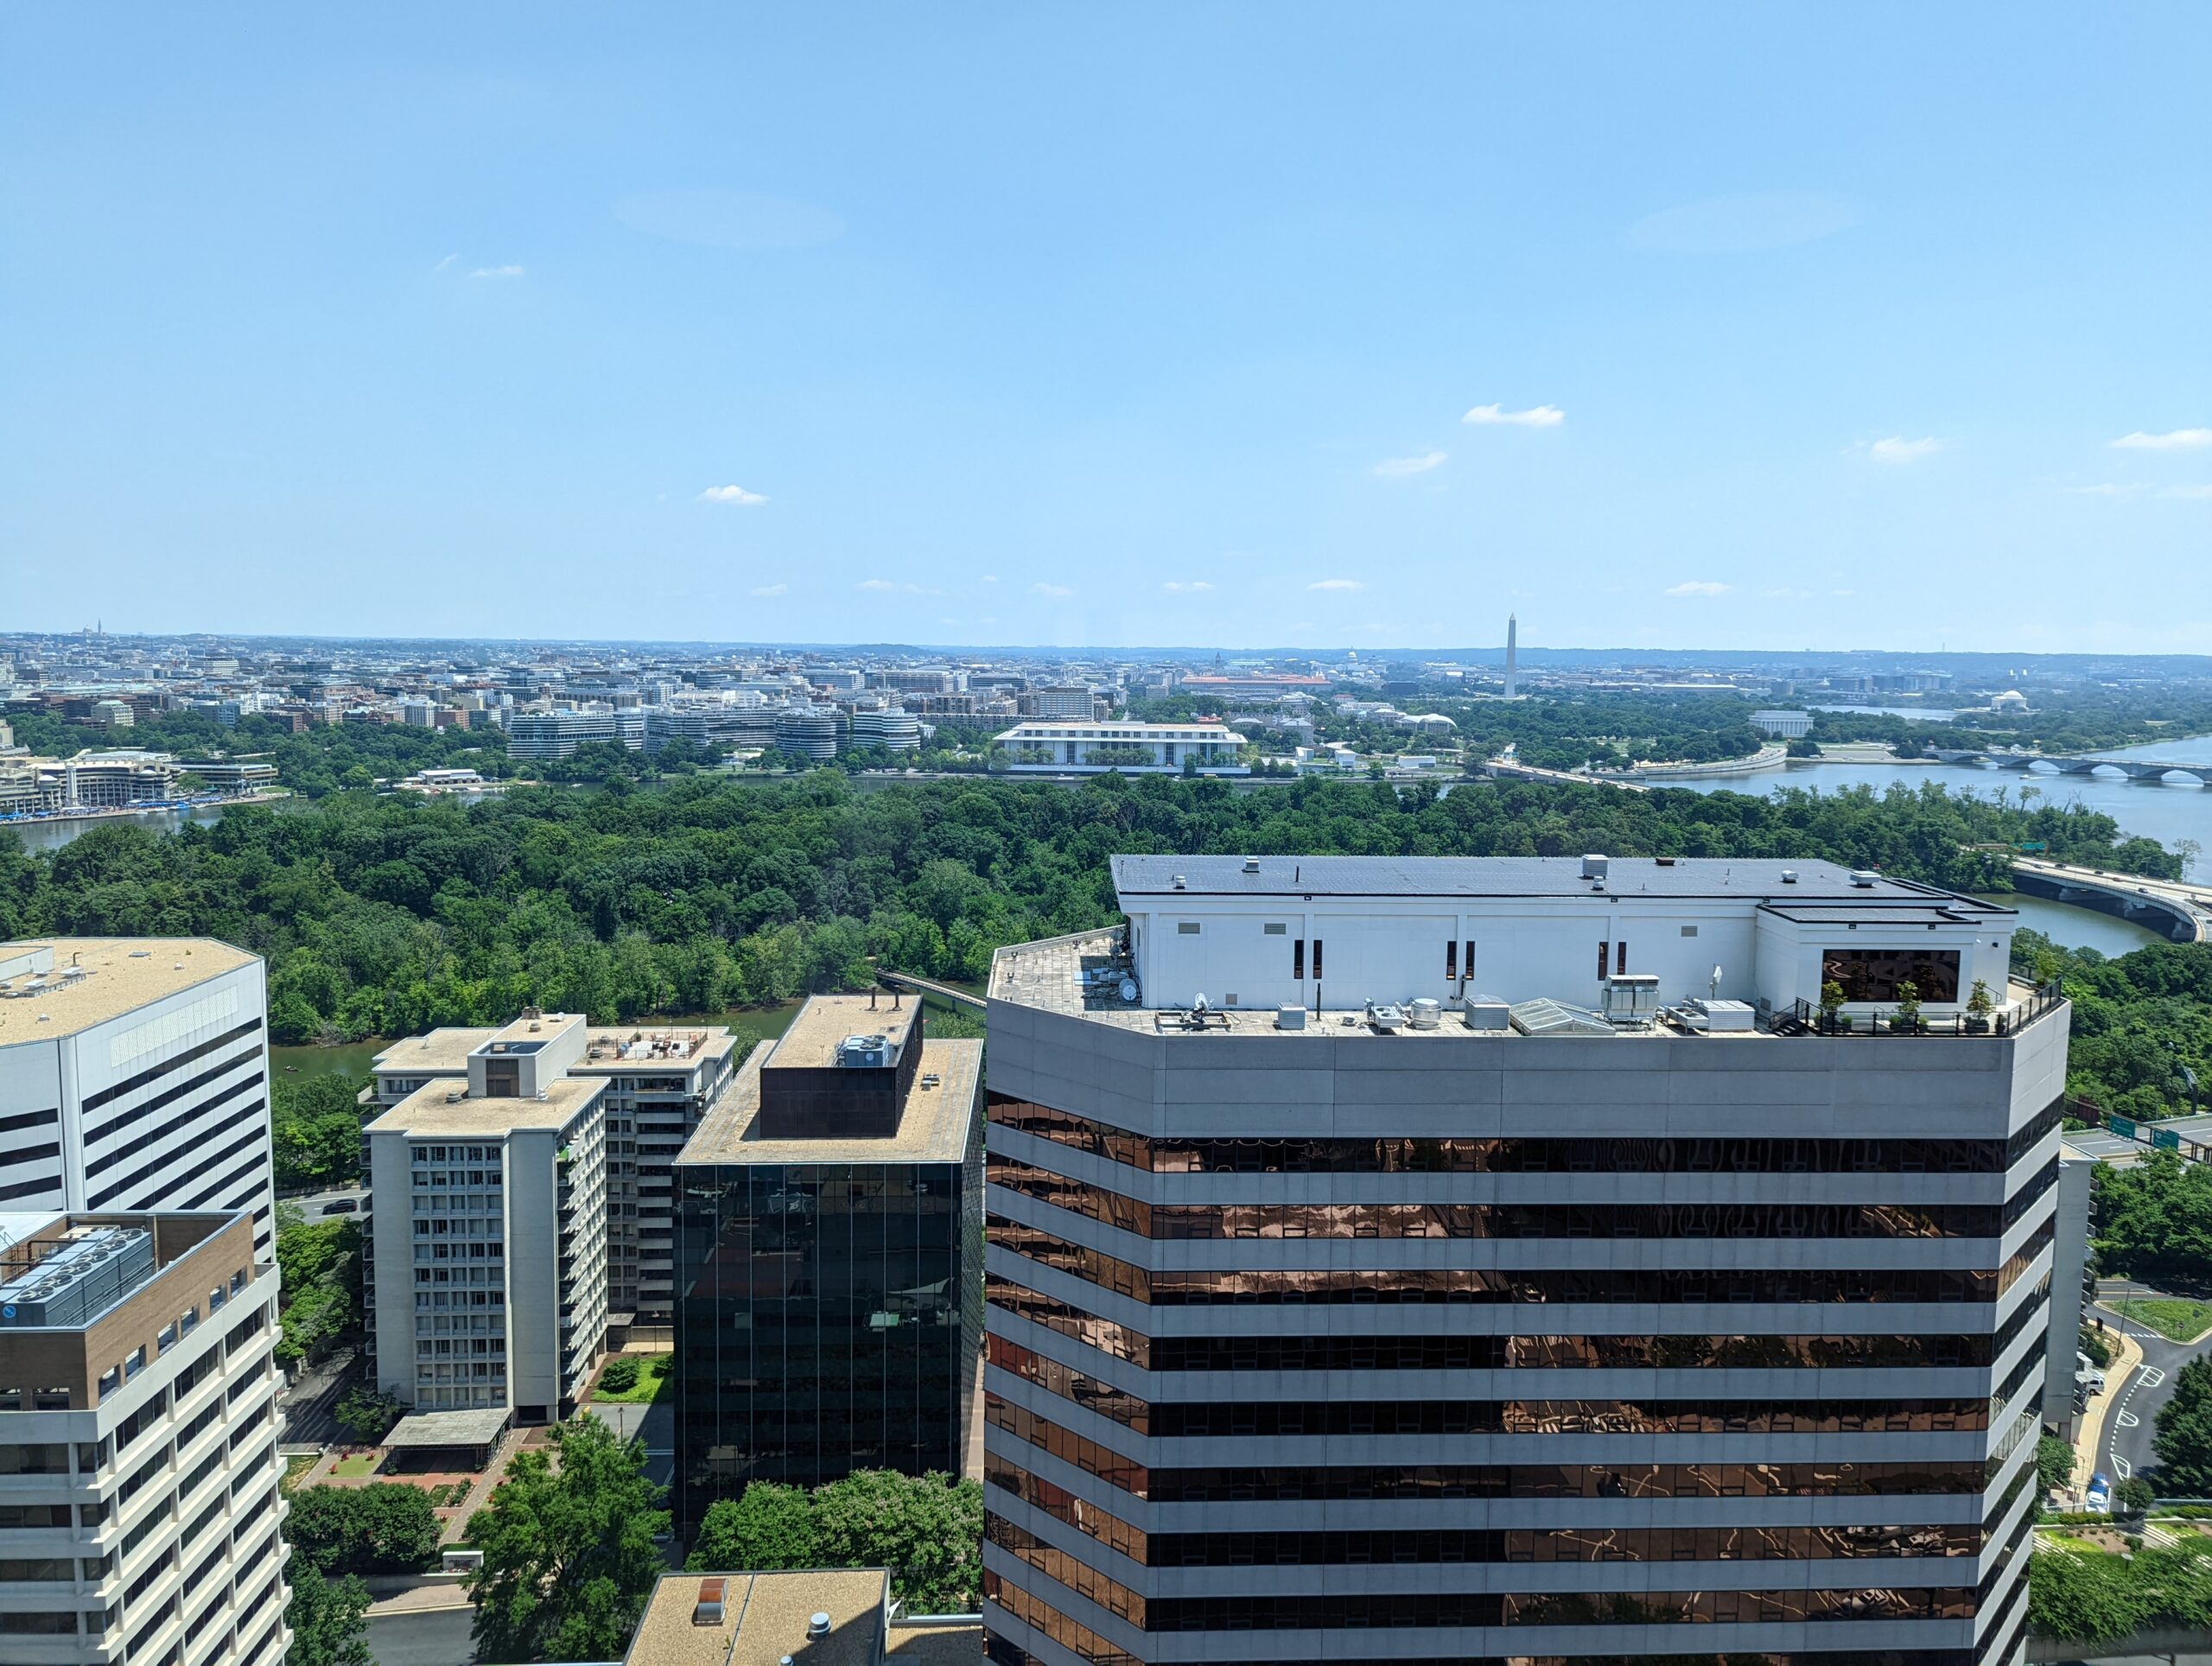 Northern Virginia Commercial Real Estate Trends